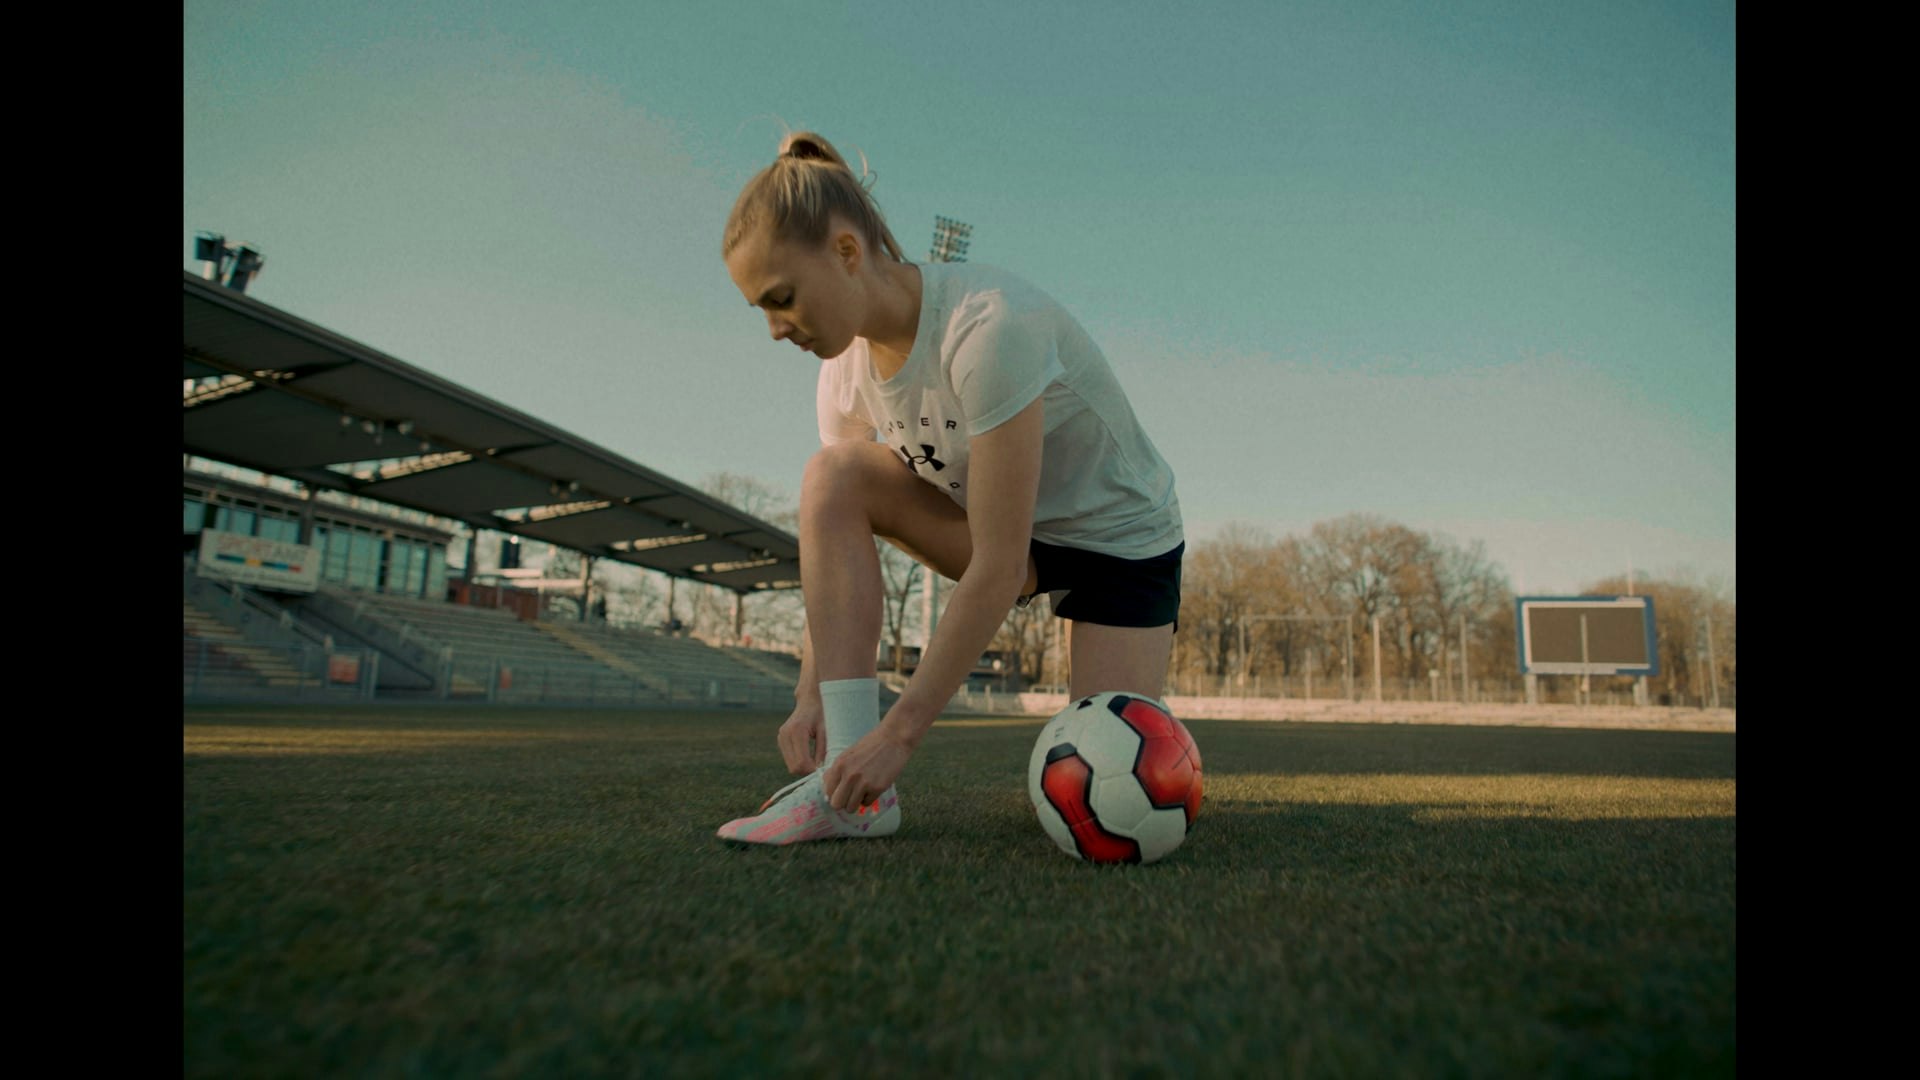 UNDER ARMOUR — THERE IS NO LIMIT W/ LAURA FREIGANG